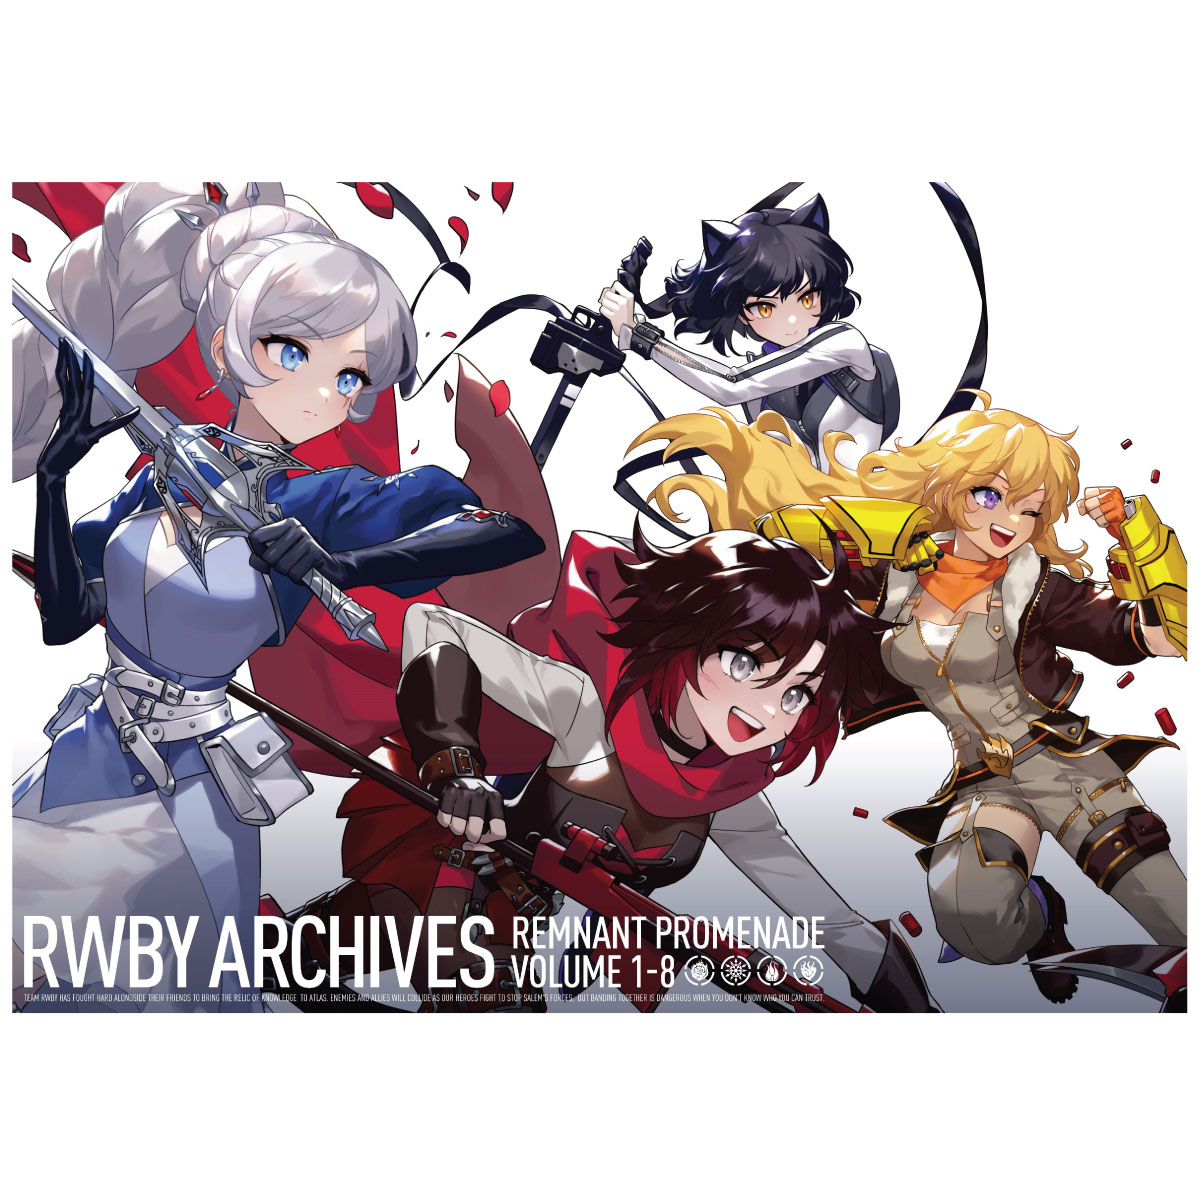 Pin by Rainy Friday on Anime posters | Rwby, Rwby poster, Anime titles